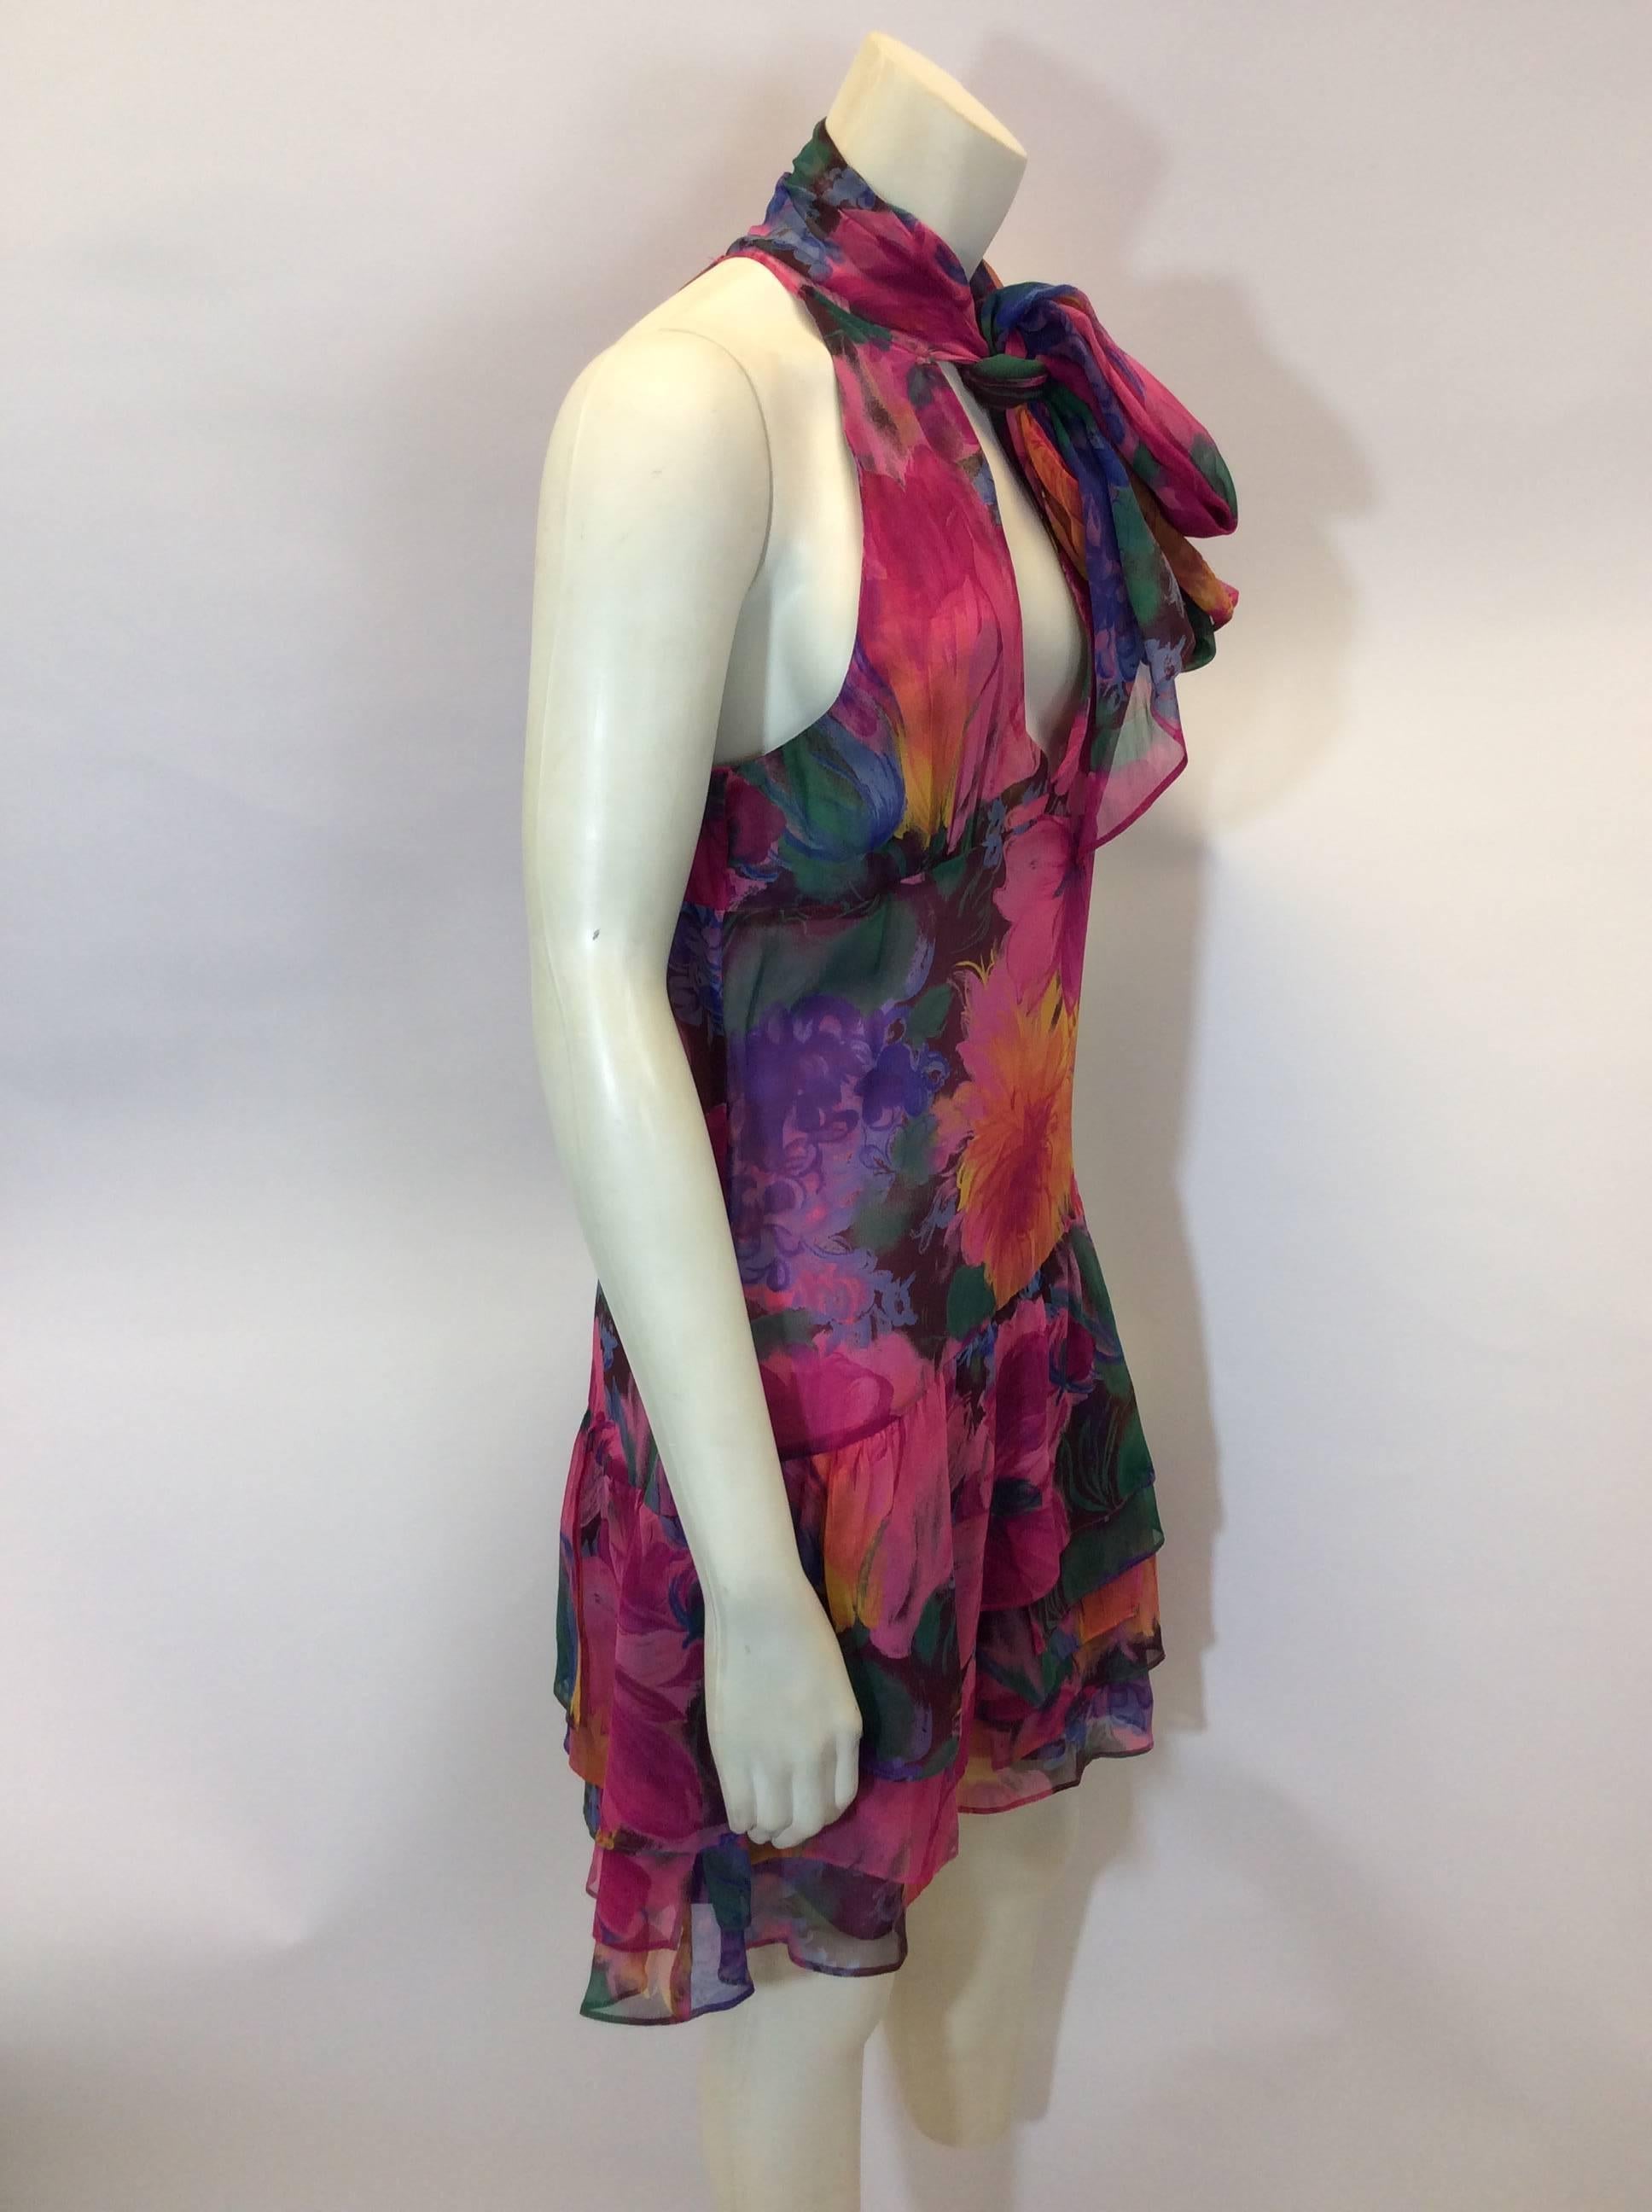 Floral Chiffon Ruffle Dress with Scarf
Side zipper closure
Translucent tie scarf attached
Size 42
100% Silk